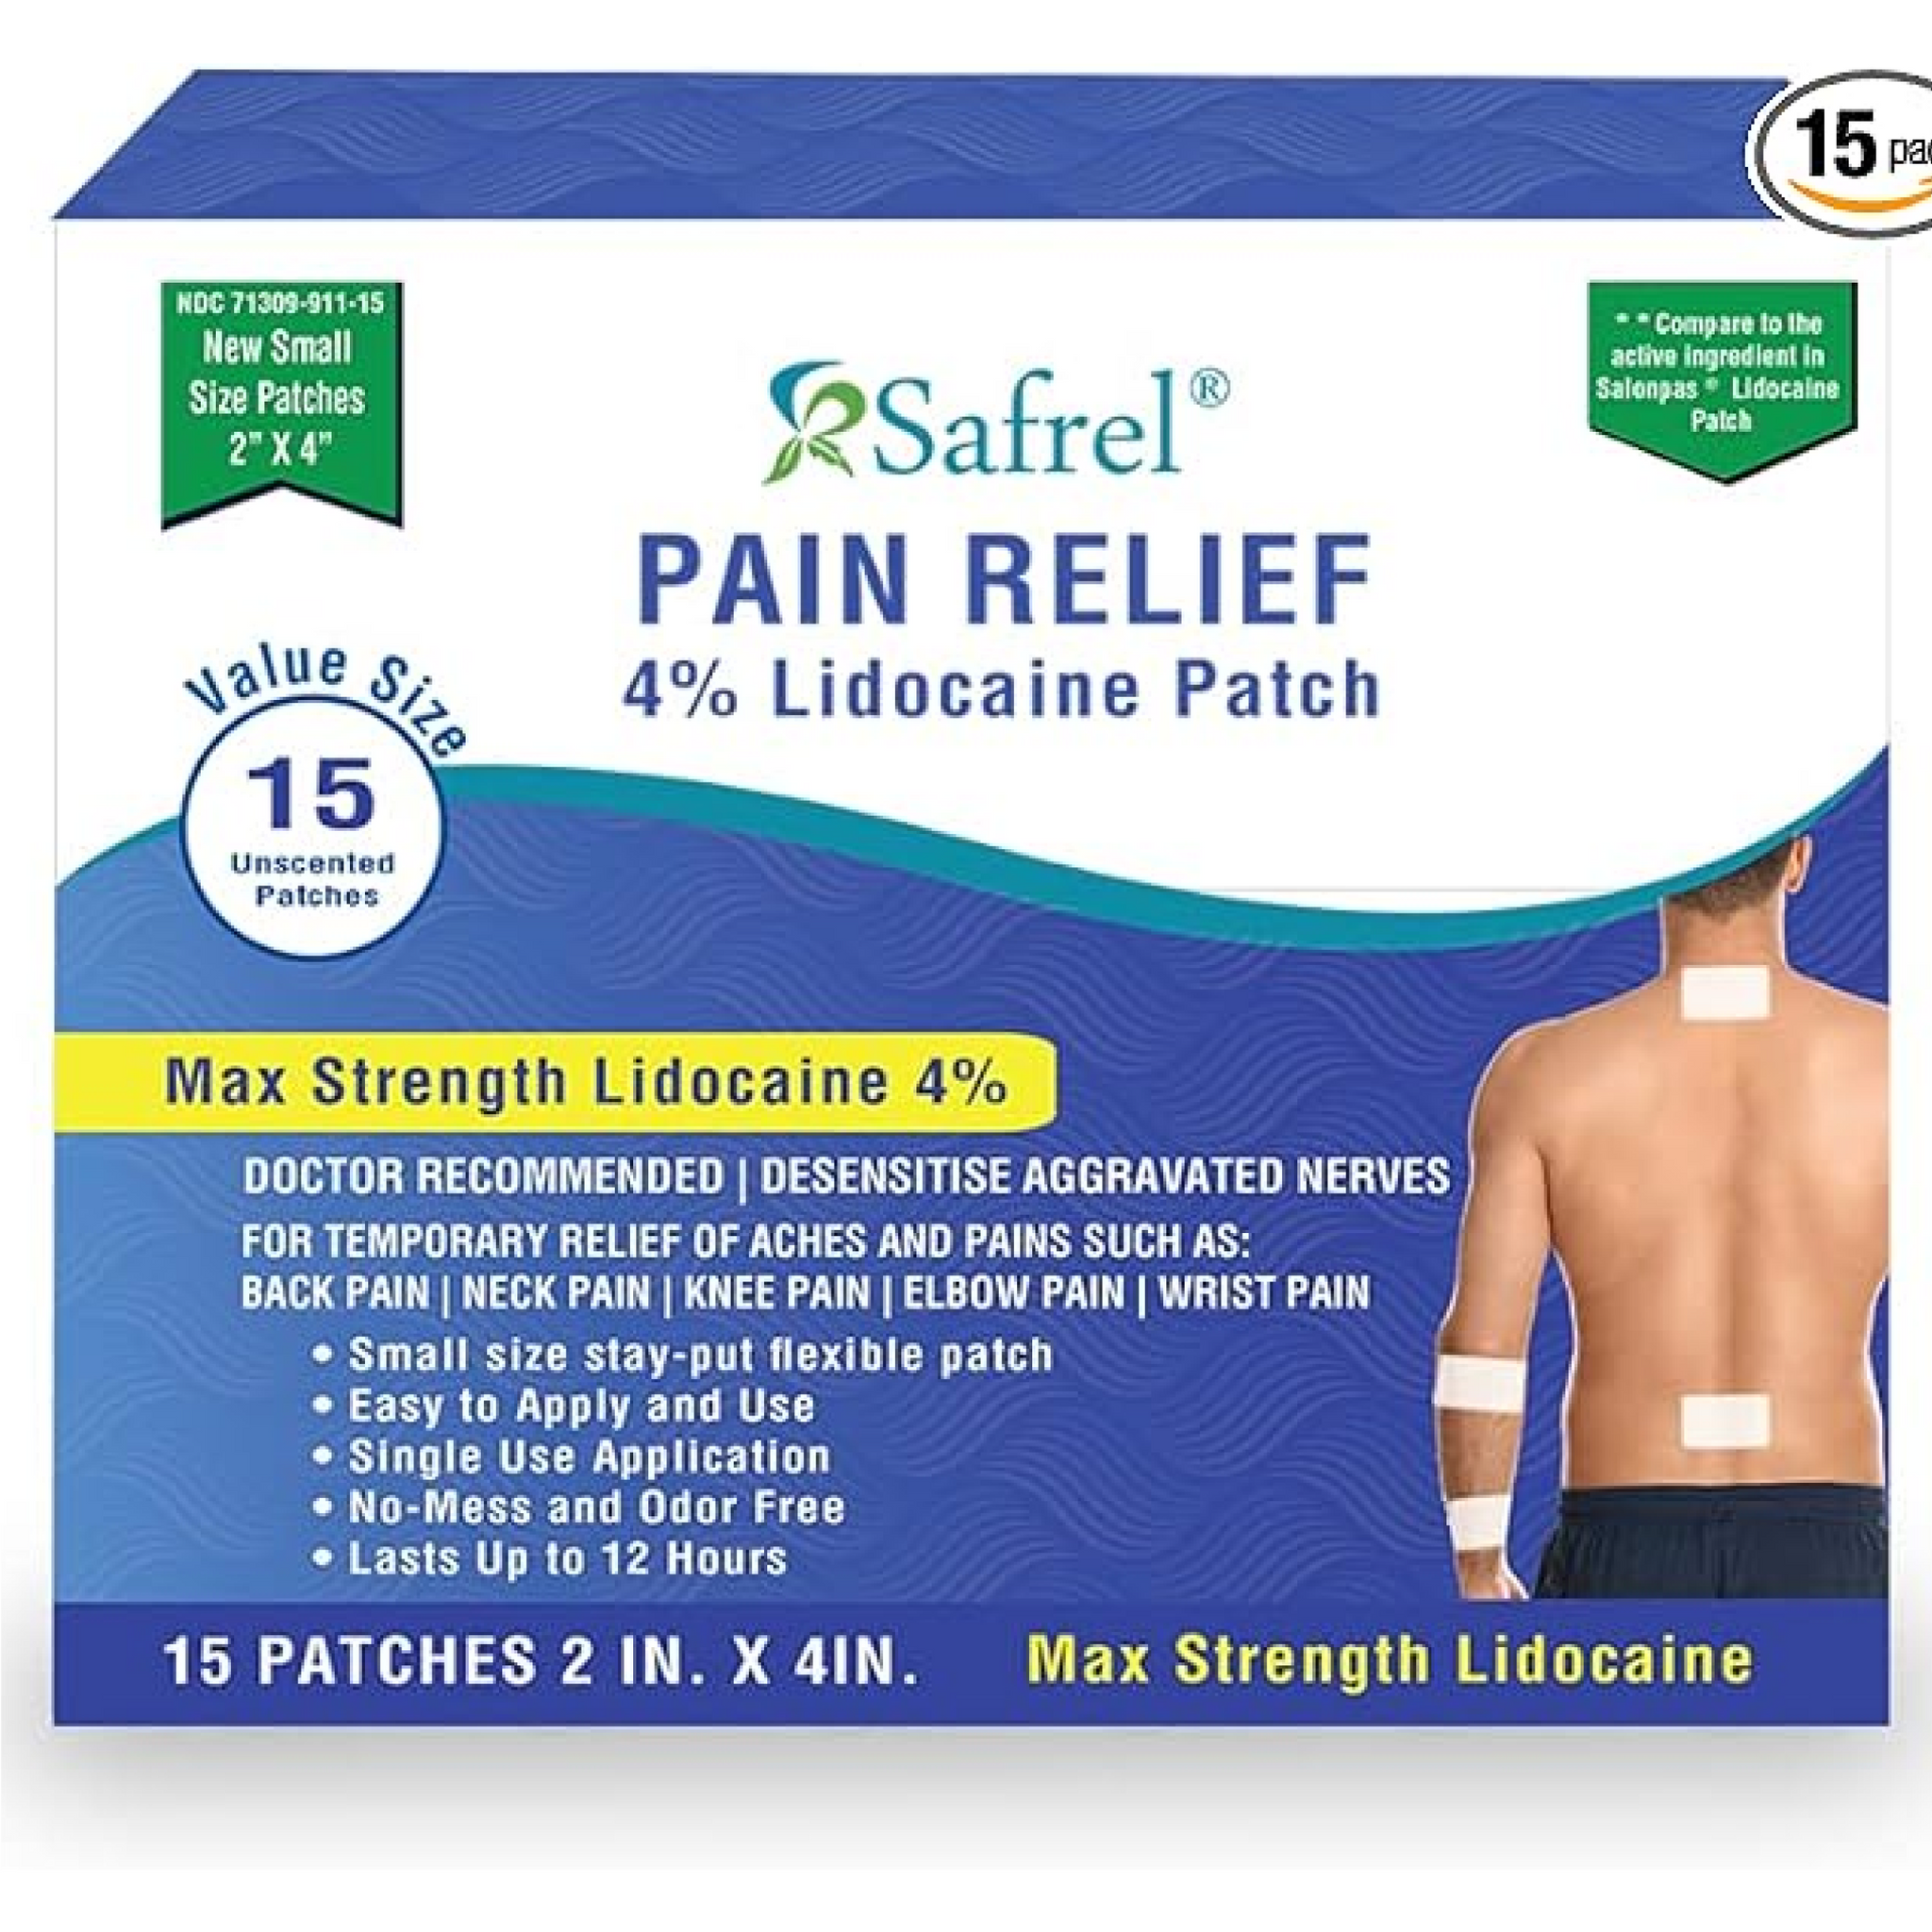 Safrel Lidocaine 4% Dry Patch 15 Count, Unscented, Small 2 x 4 Inches Pain Relief Patches for Knees, Ankle, Back, Elbows, Shoulders, Patch Away Your Pain Without Jelly Feeling, Compare to Salonpas